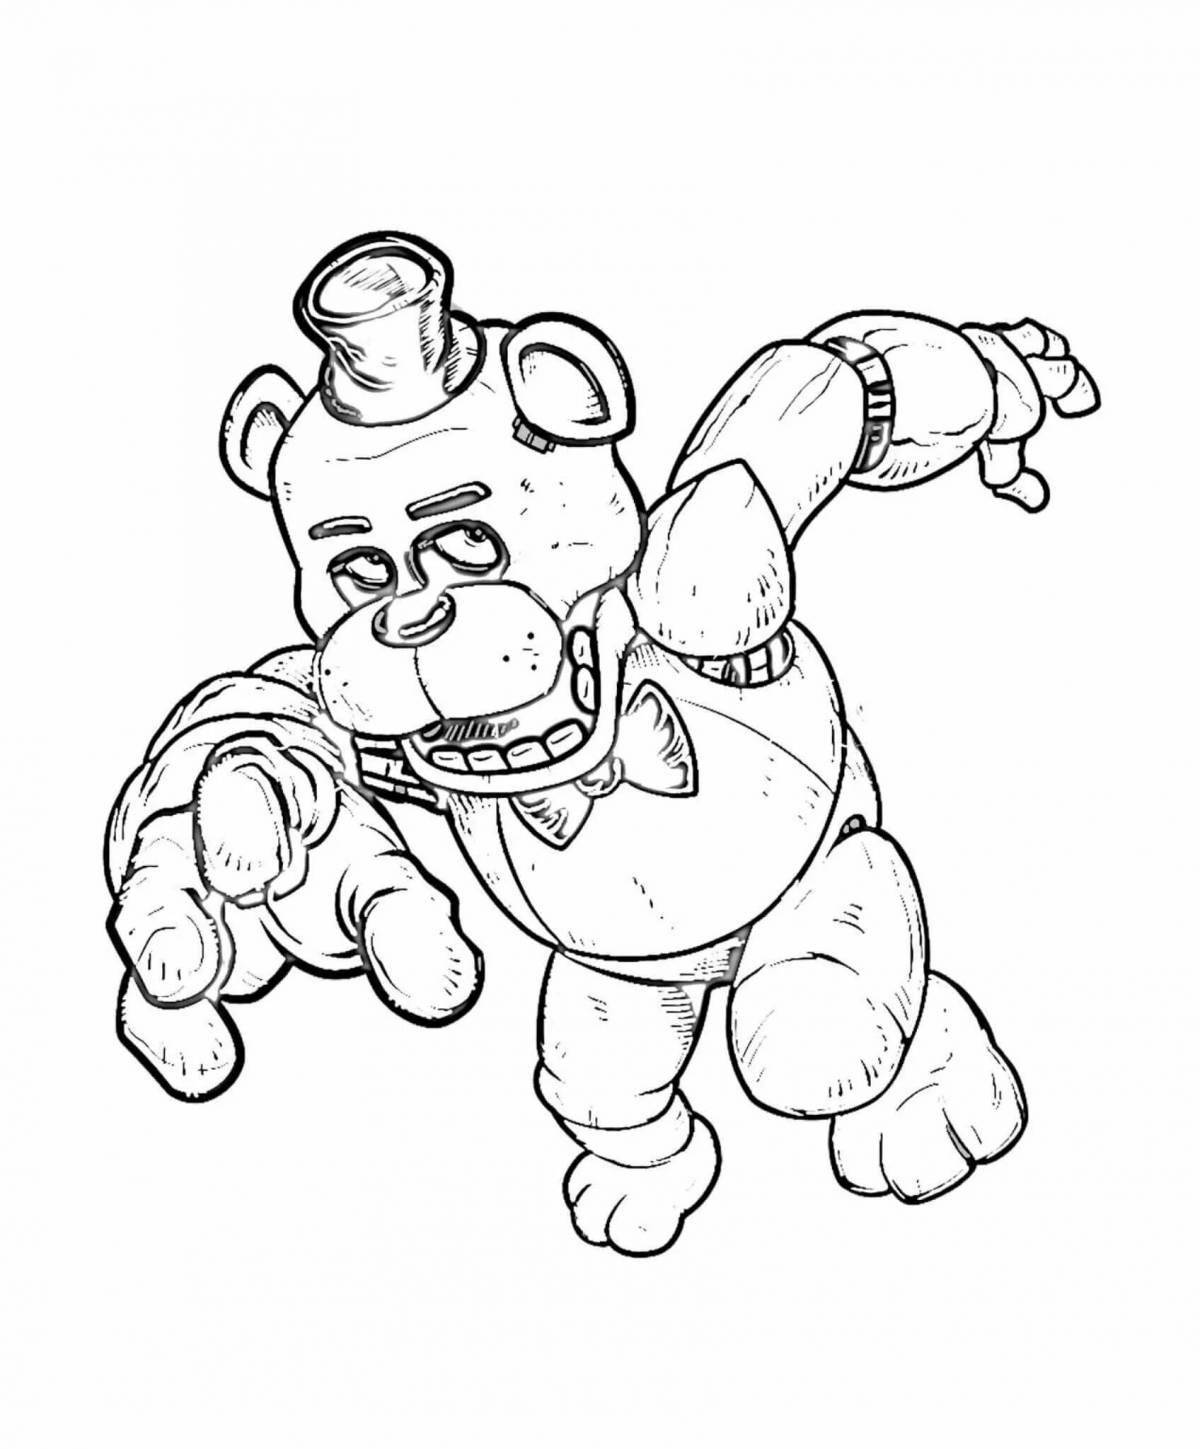 Golden freddy's majestic coloring